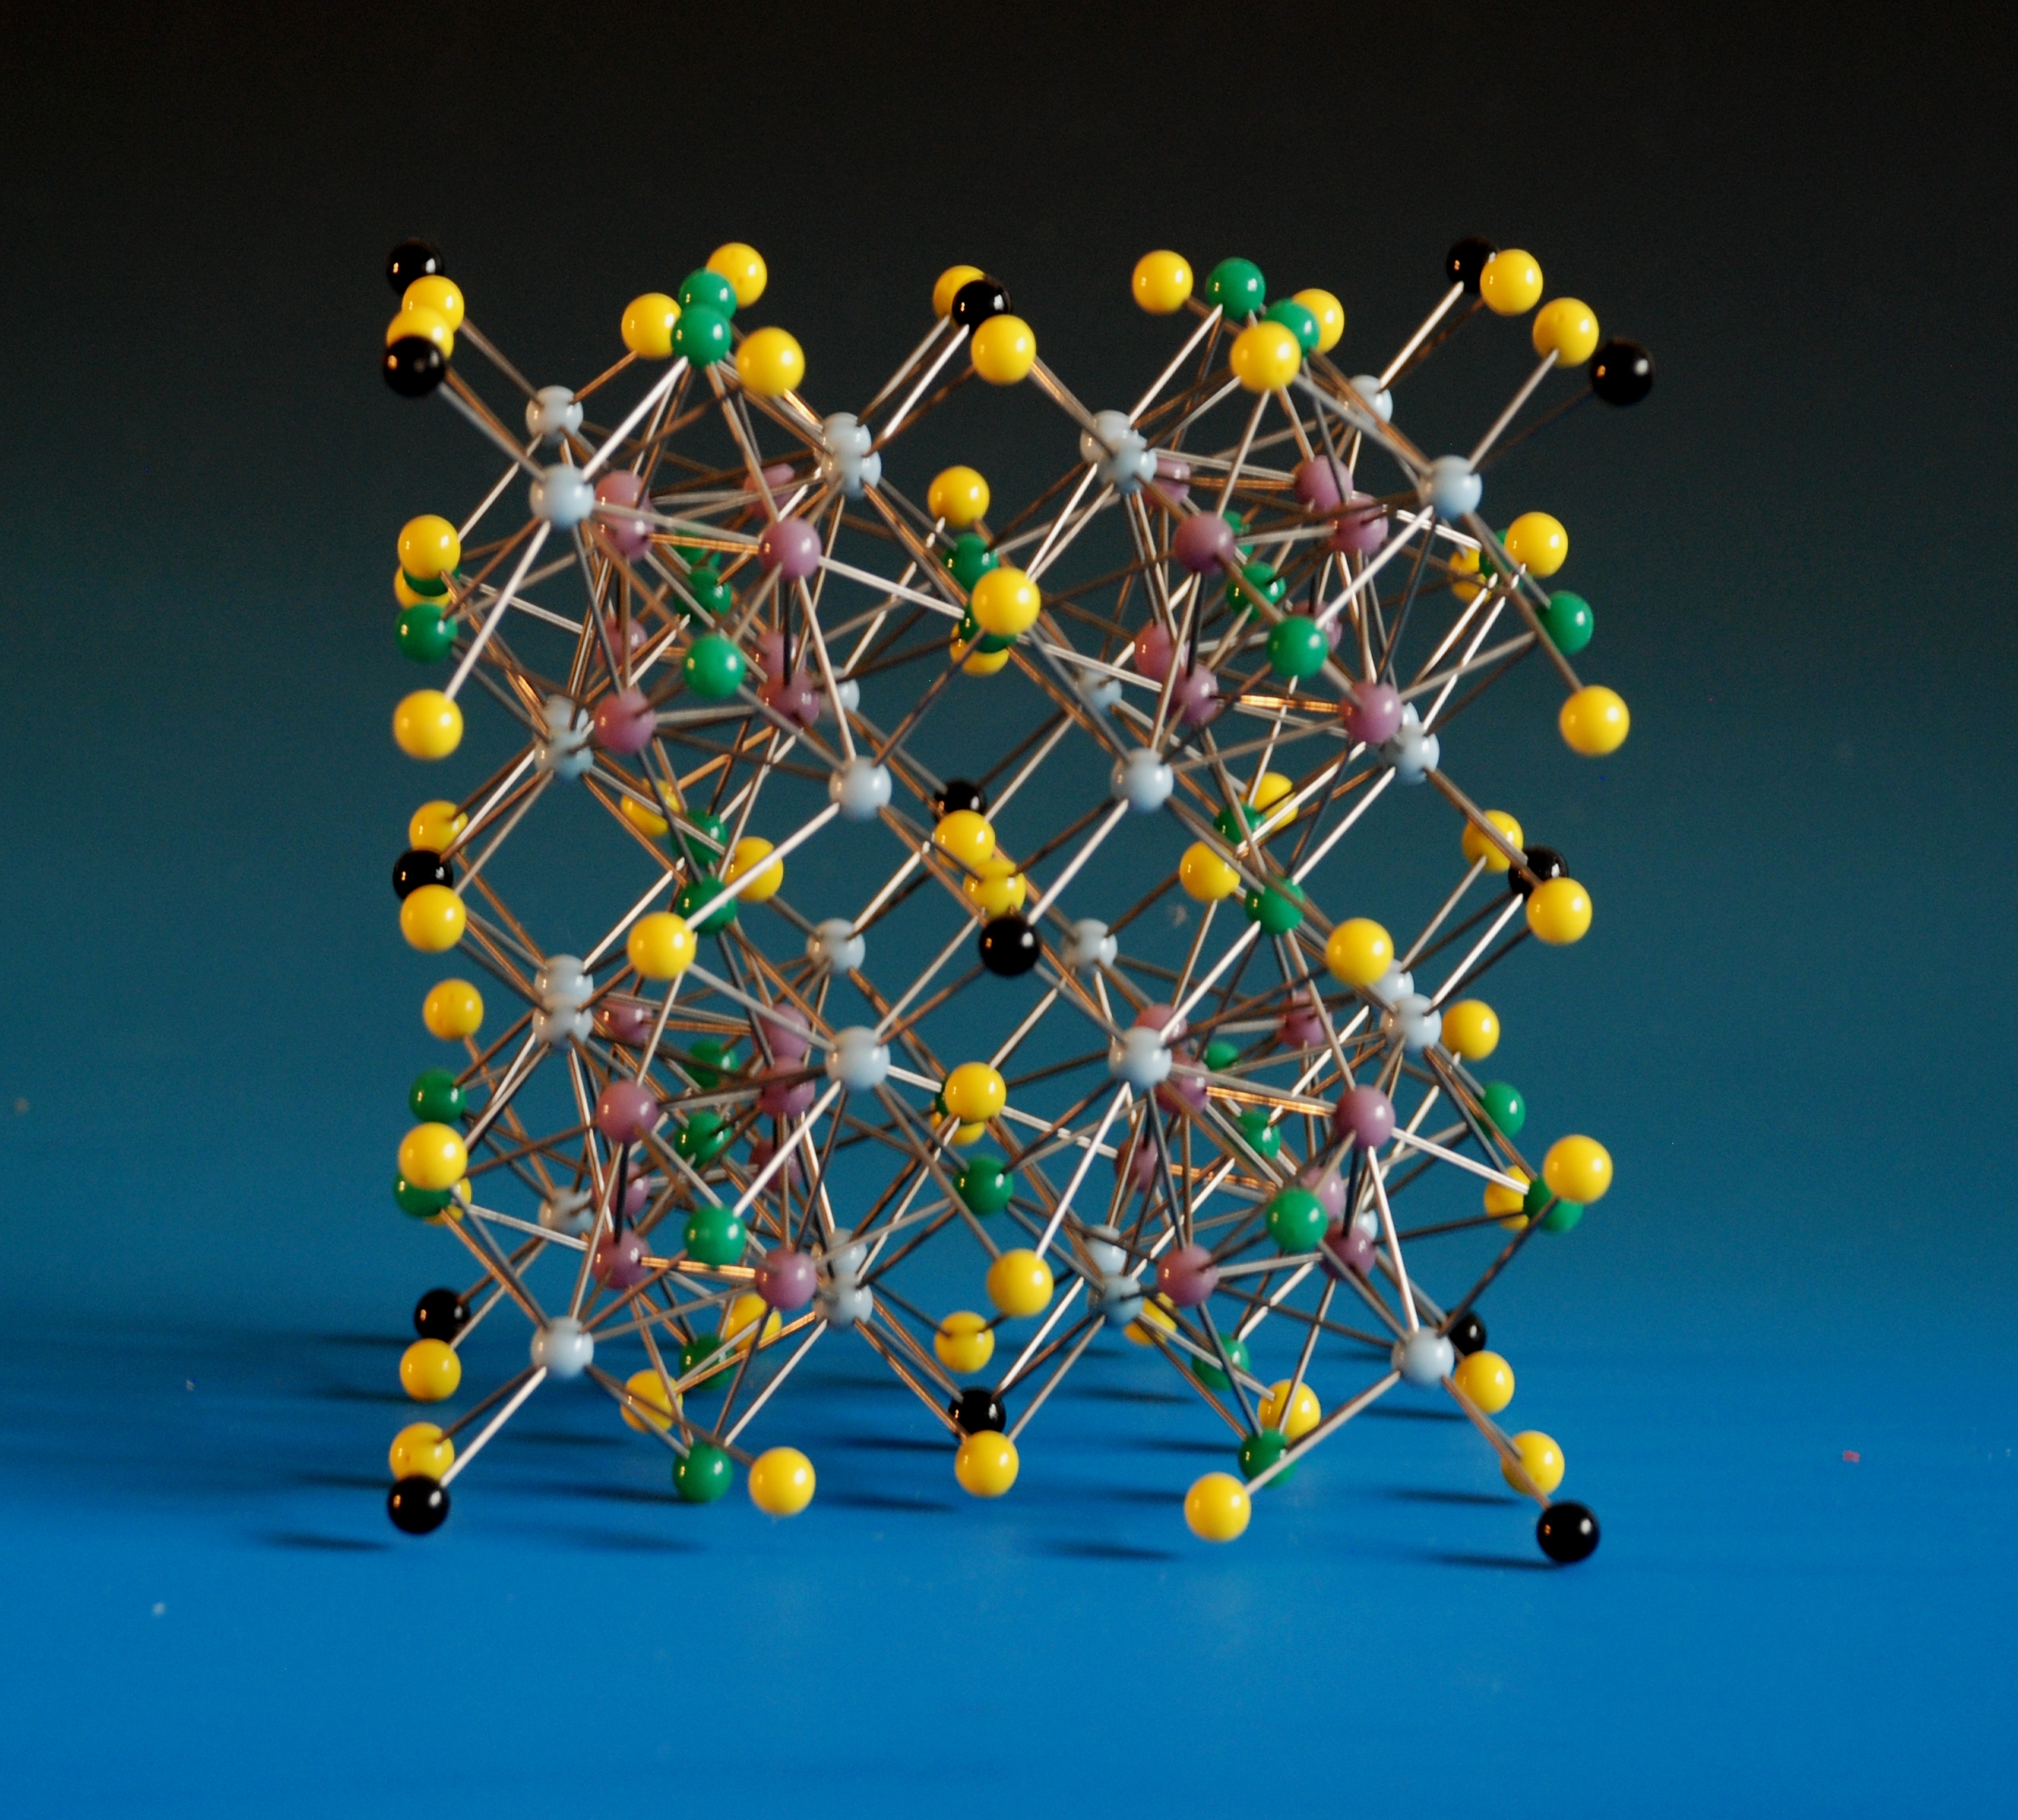 A crystal structure model of Manganese Thorium alloy